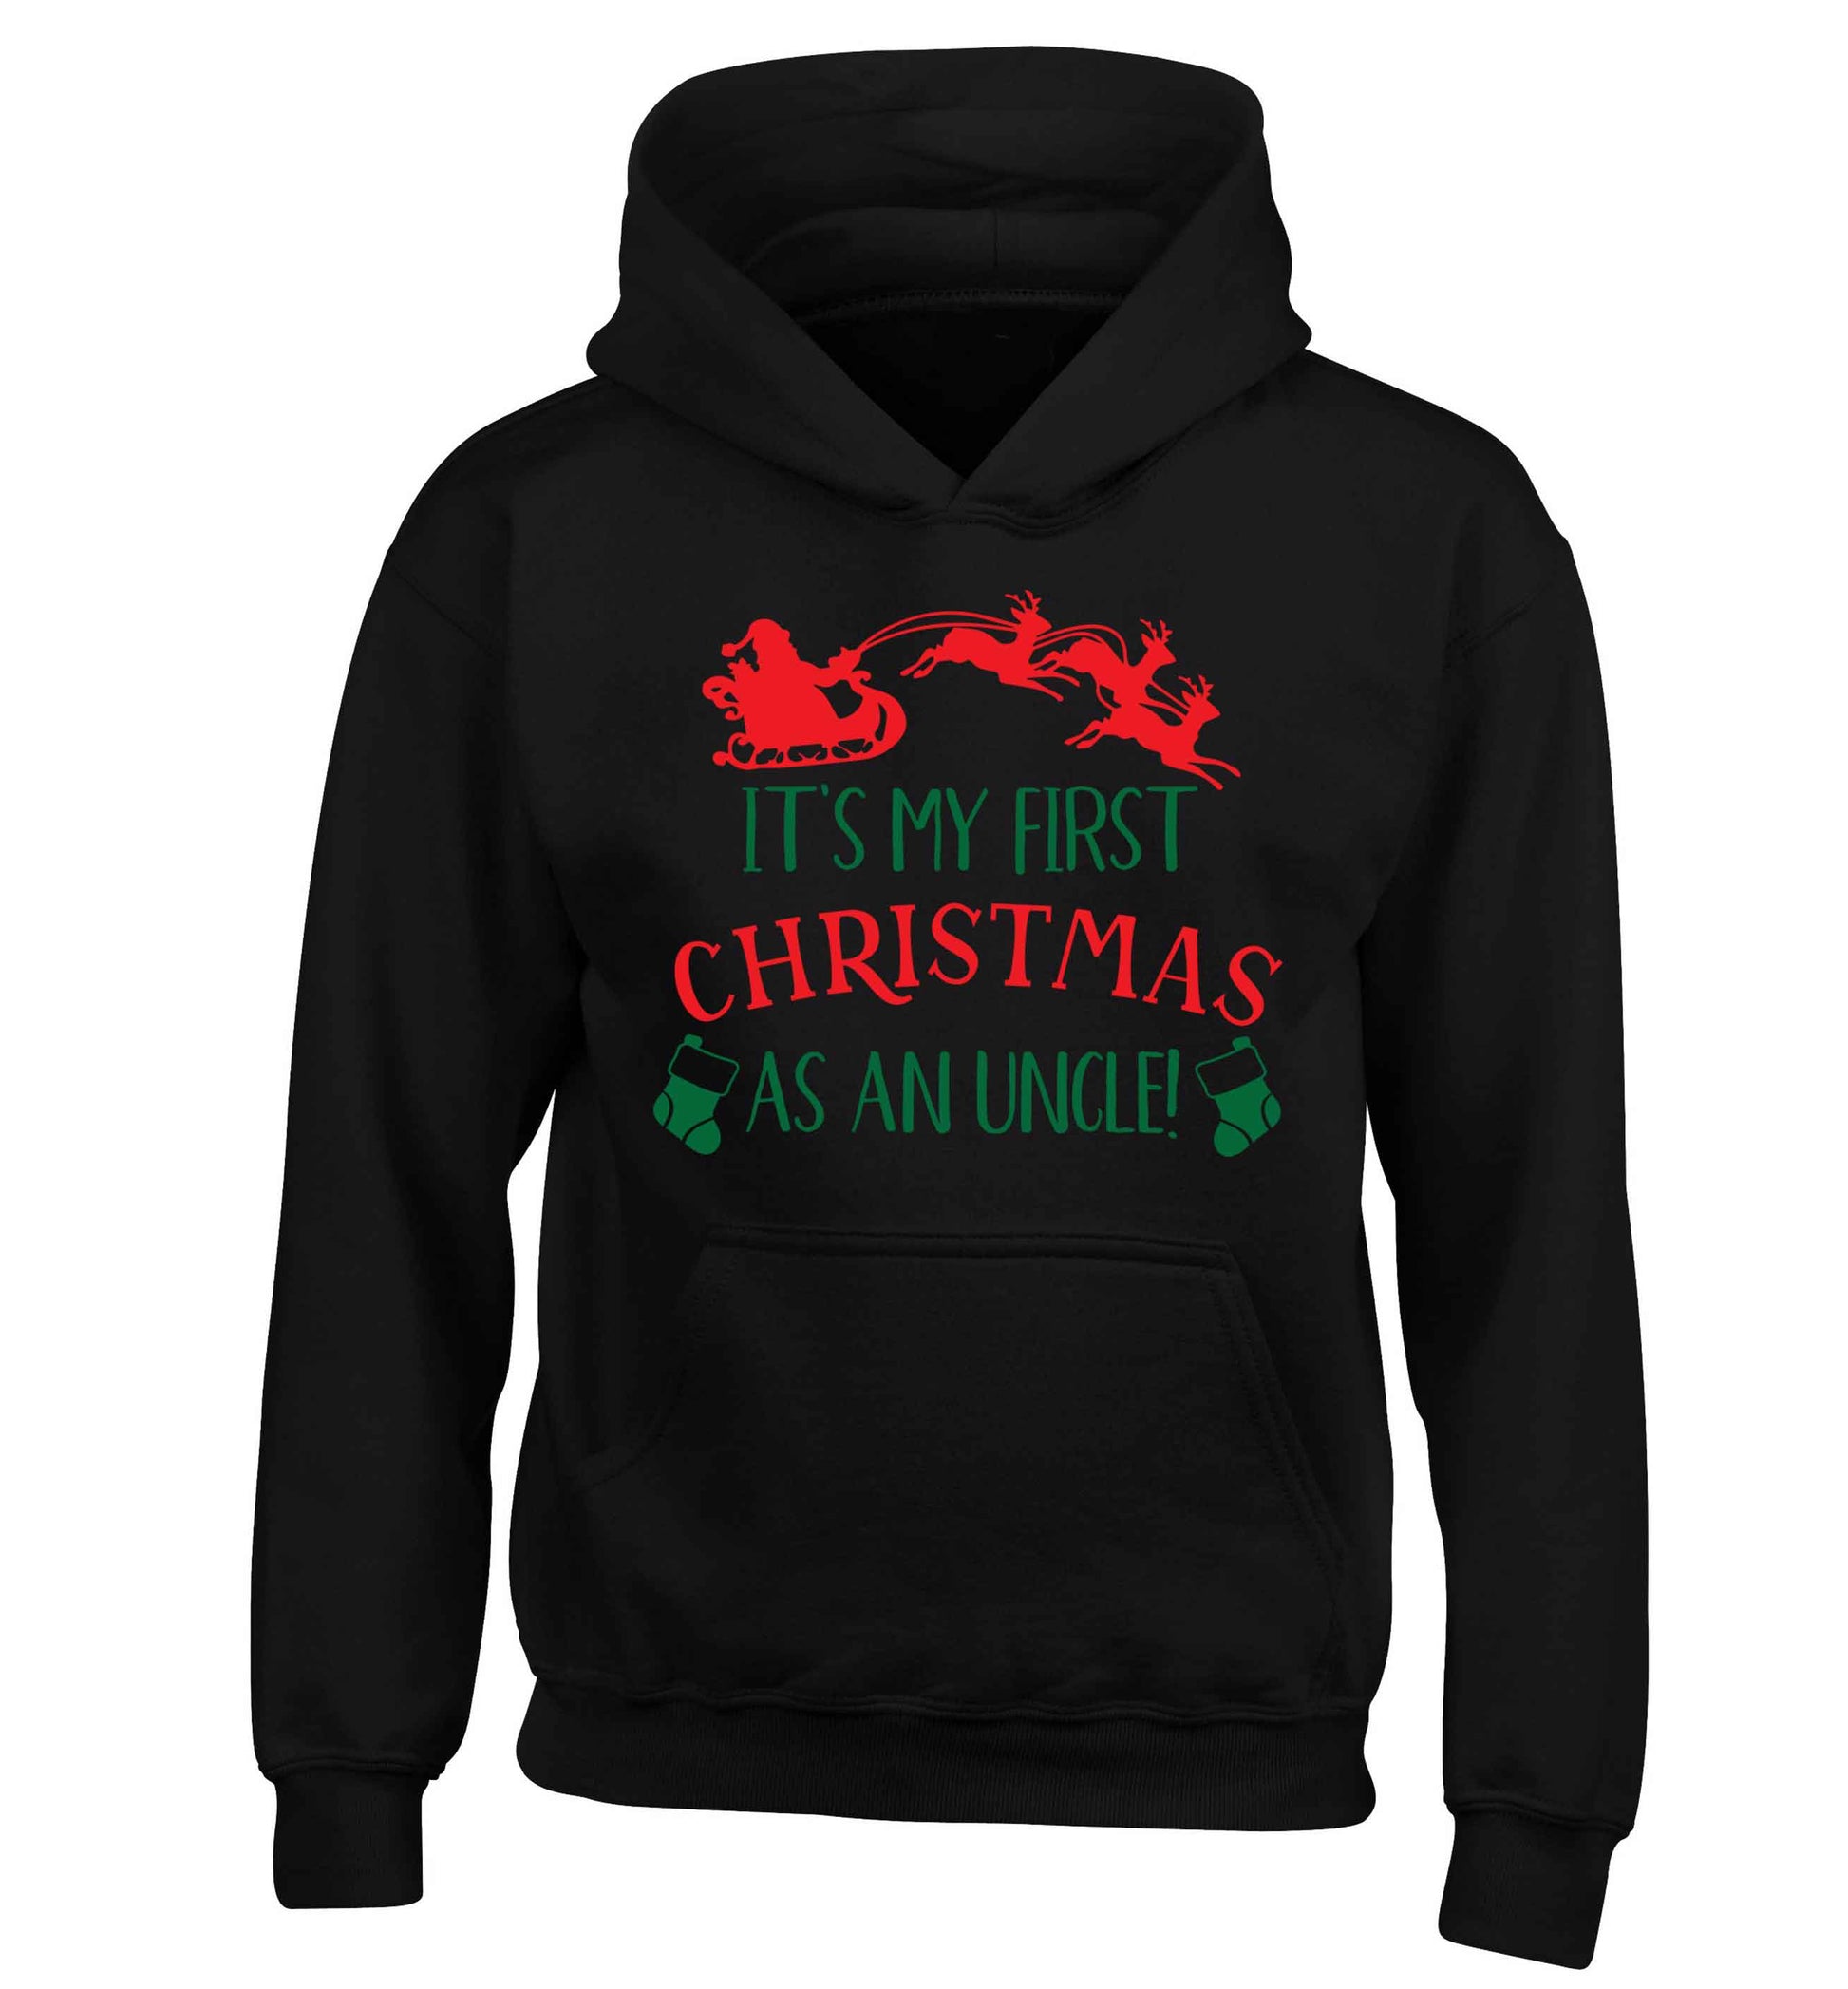 It's my first Christmas as an uncle! children's black hoodie 12-13 Years